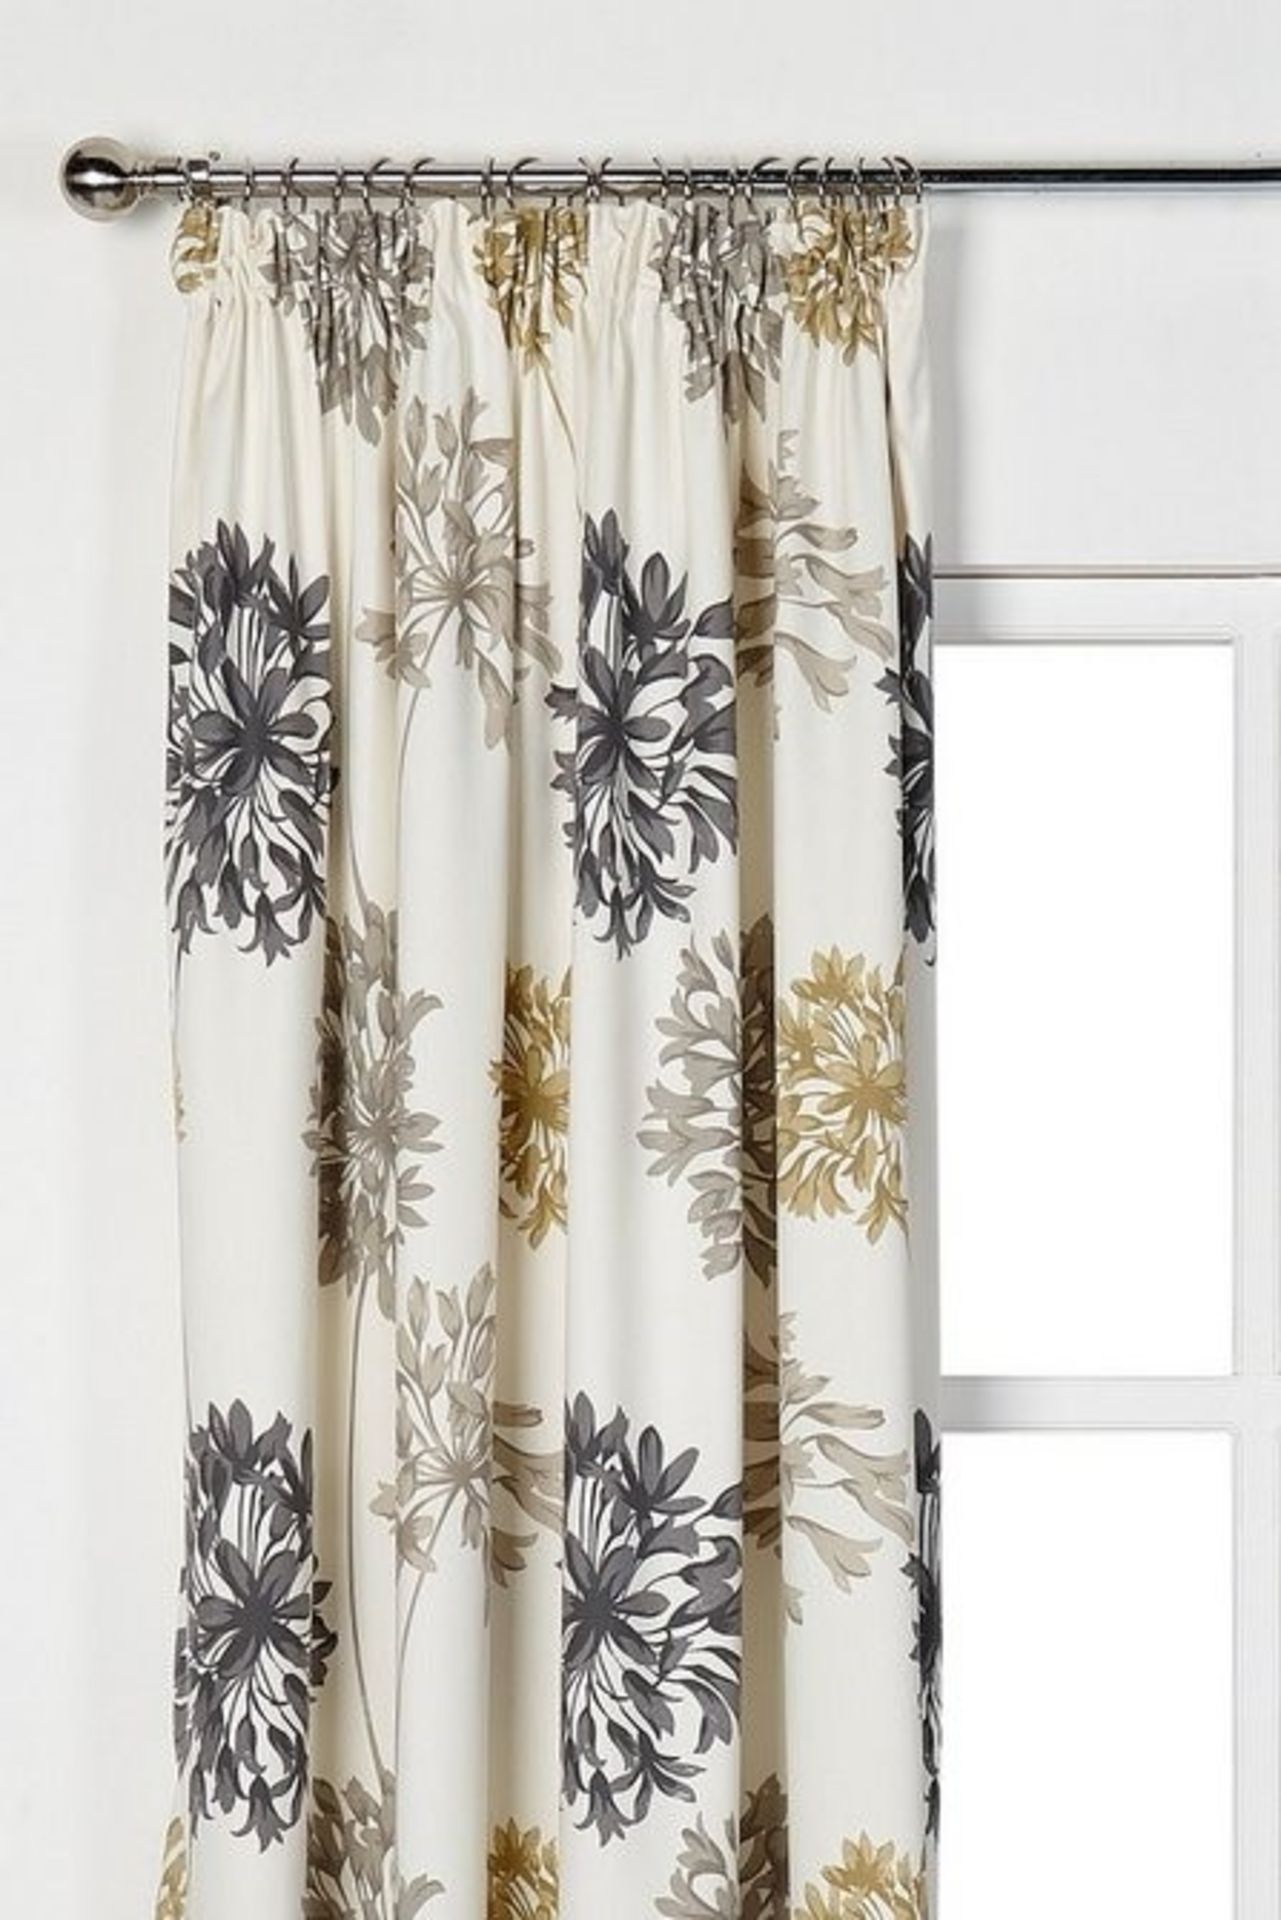 1 AS NEW BAGGED PAIR OF LAURABETH PENCIL PLEAT LINED CURTAINS / 66 X 72" / RRP £37.99 (PUBLIC